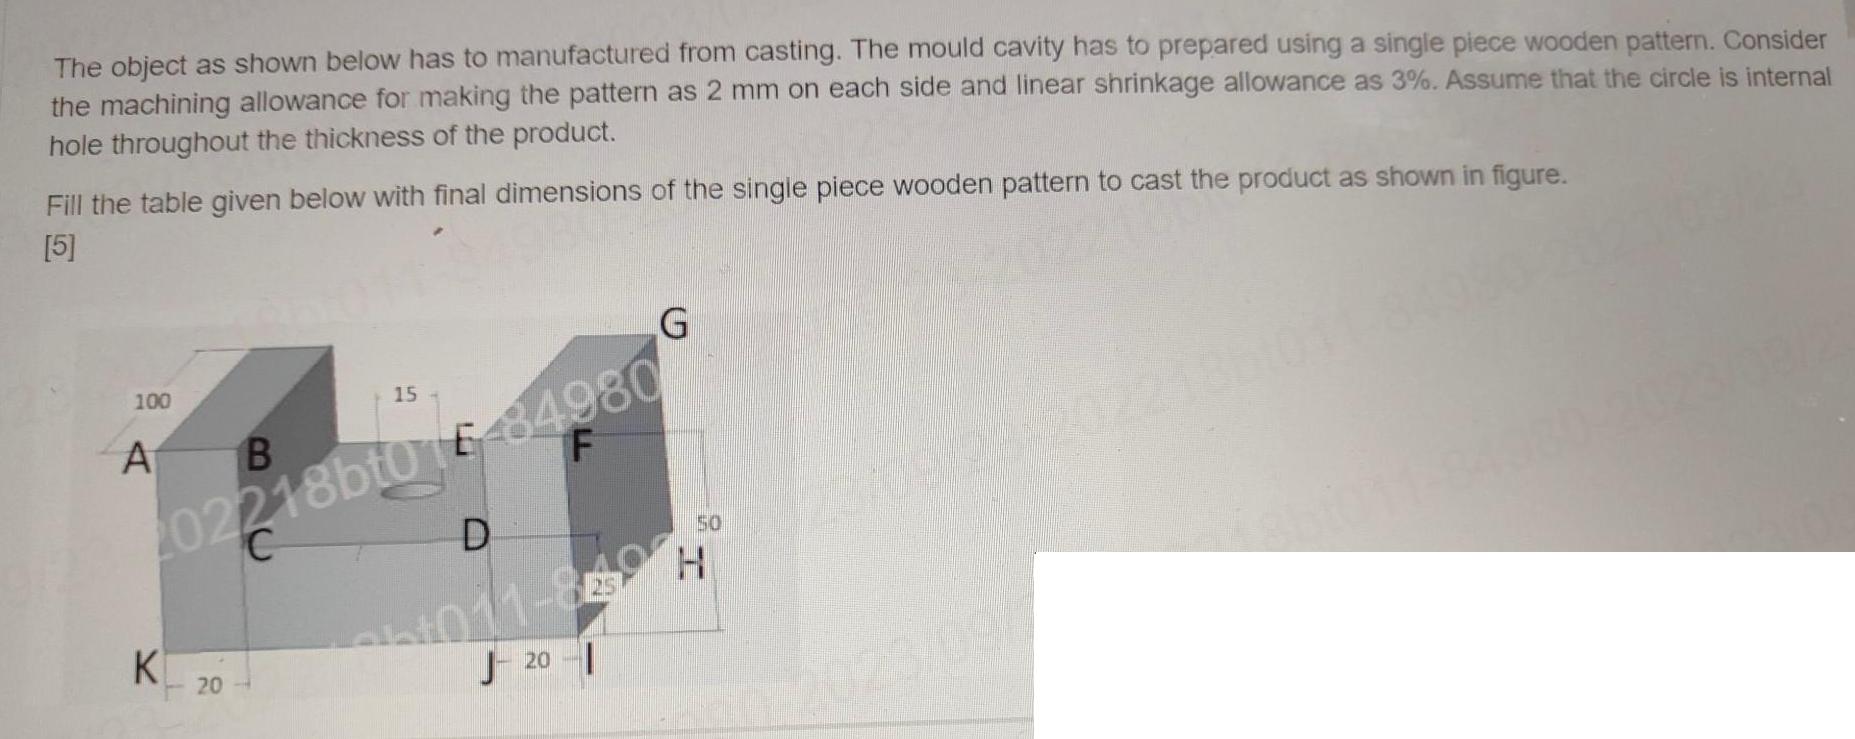 The object as shown below has to manufactured from casting. The mould cavity has to prepared using a single